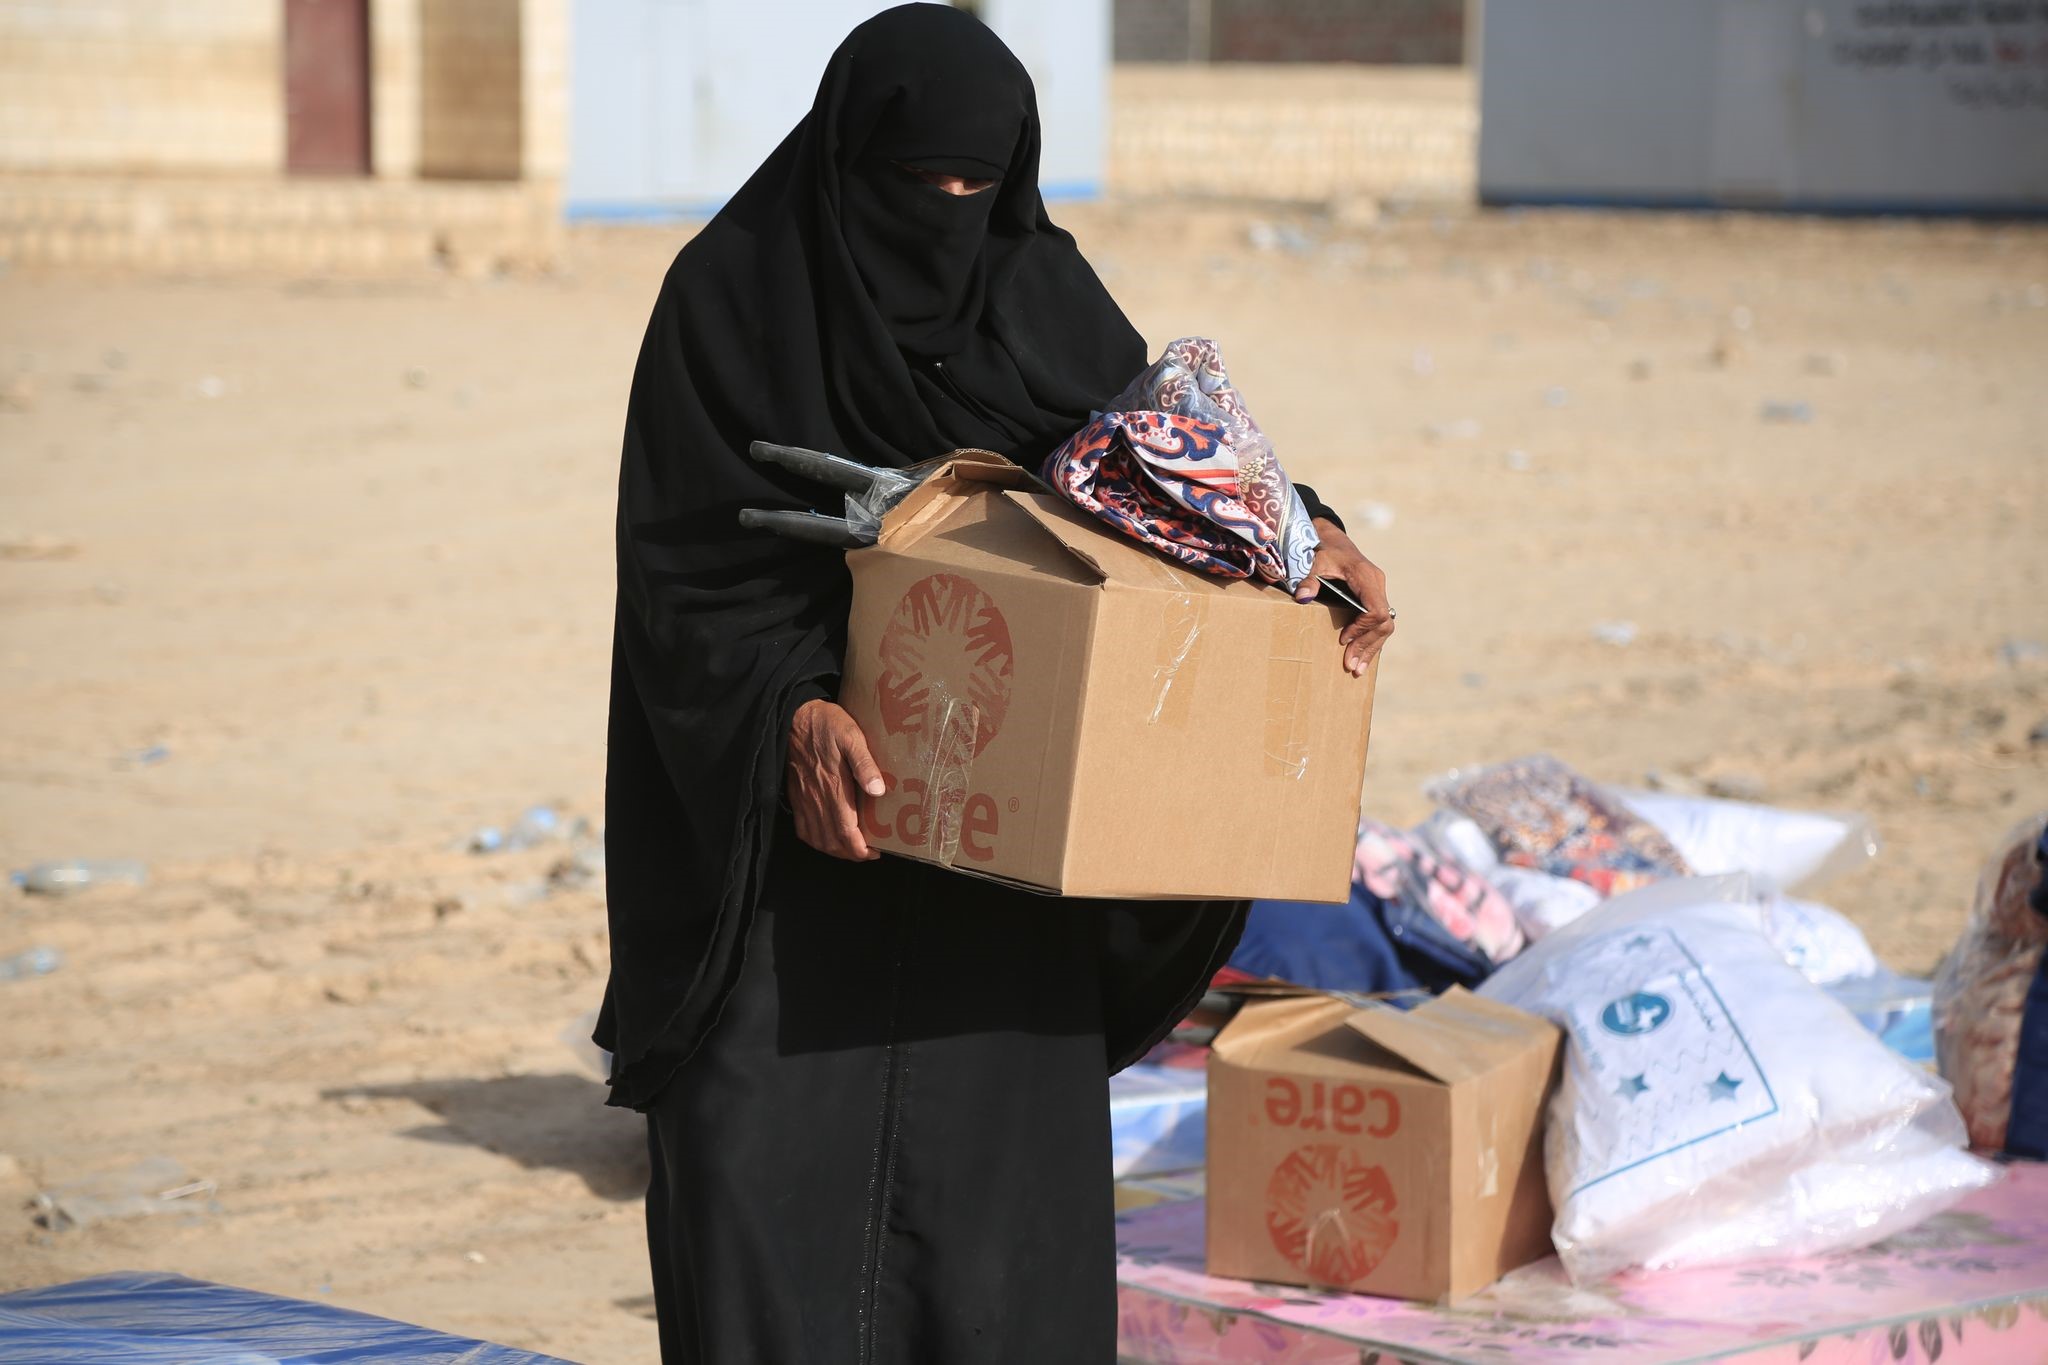 A woman carrying a box